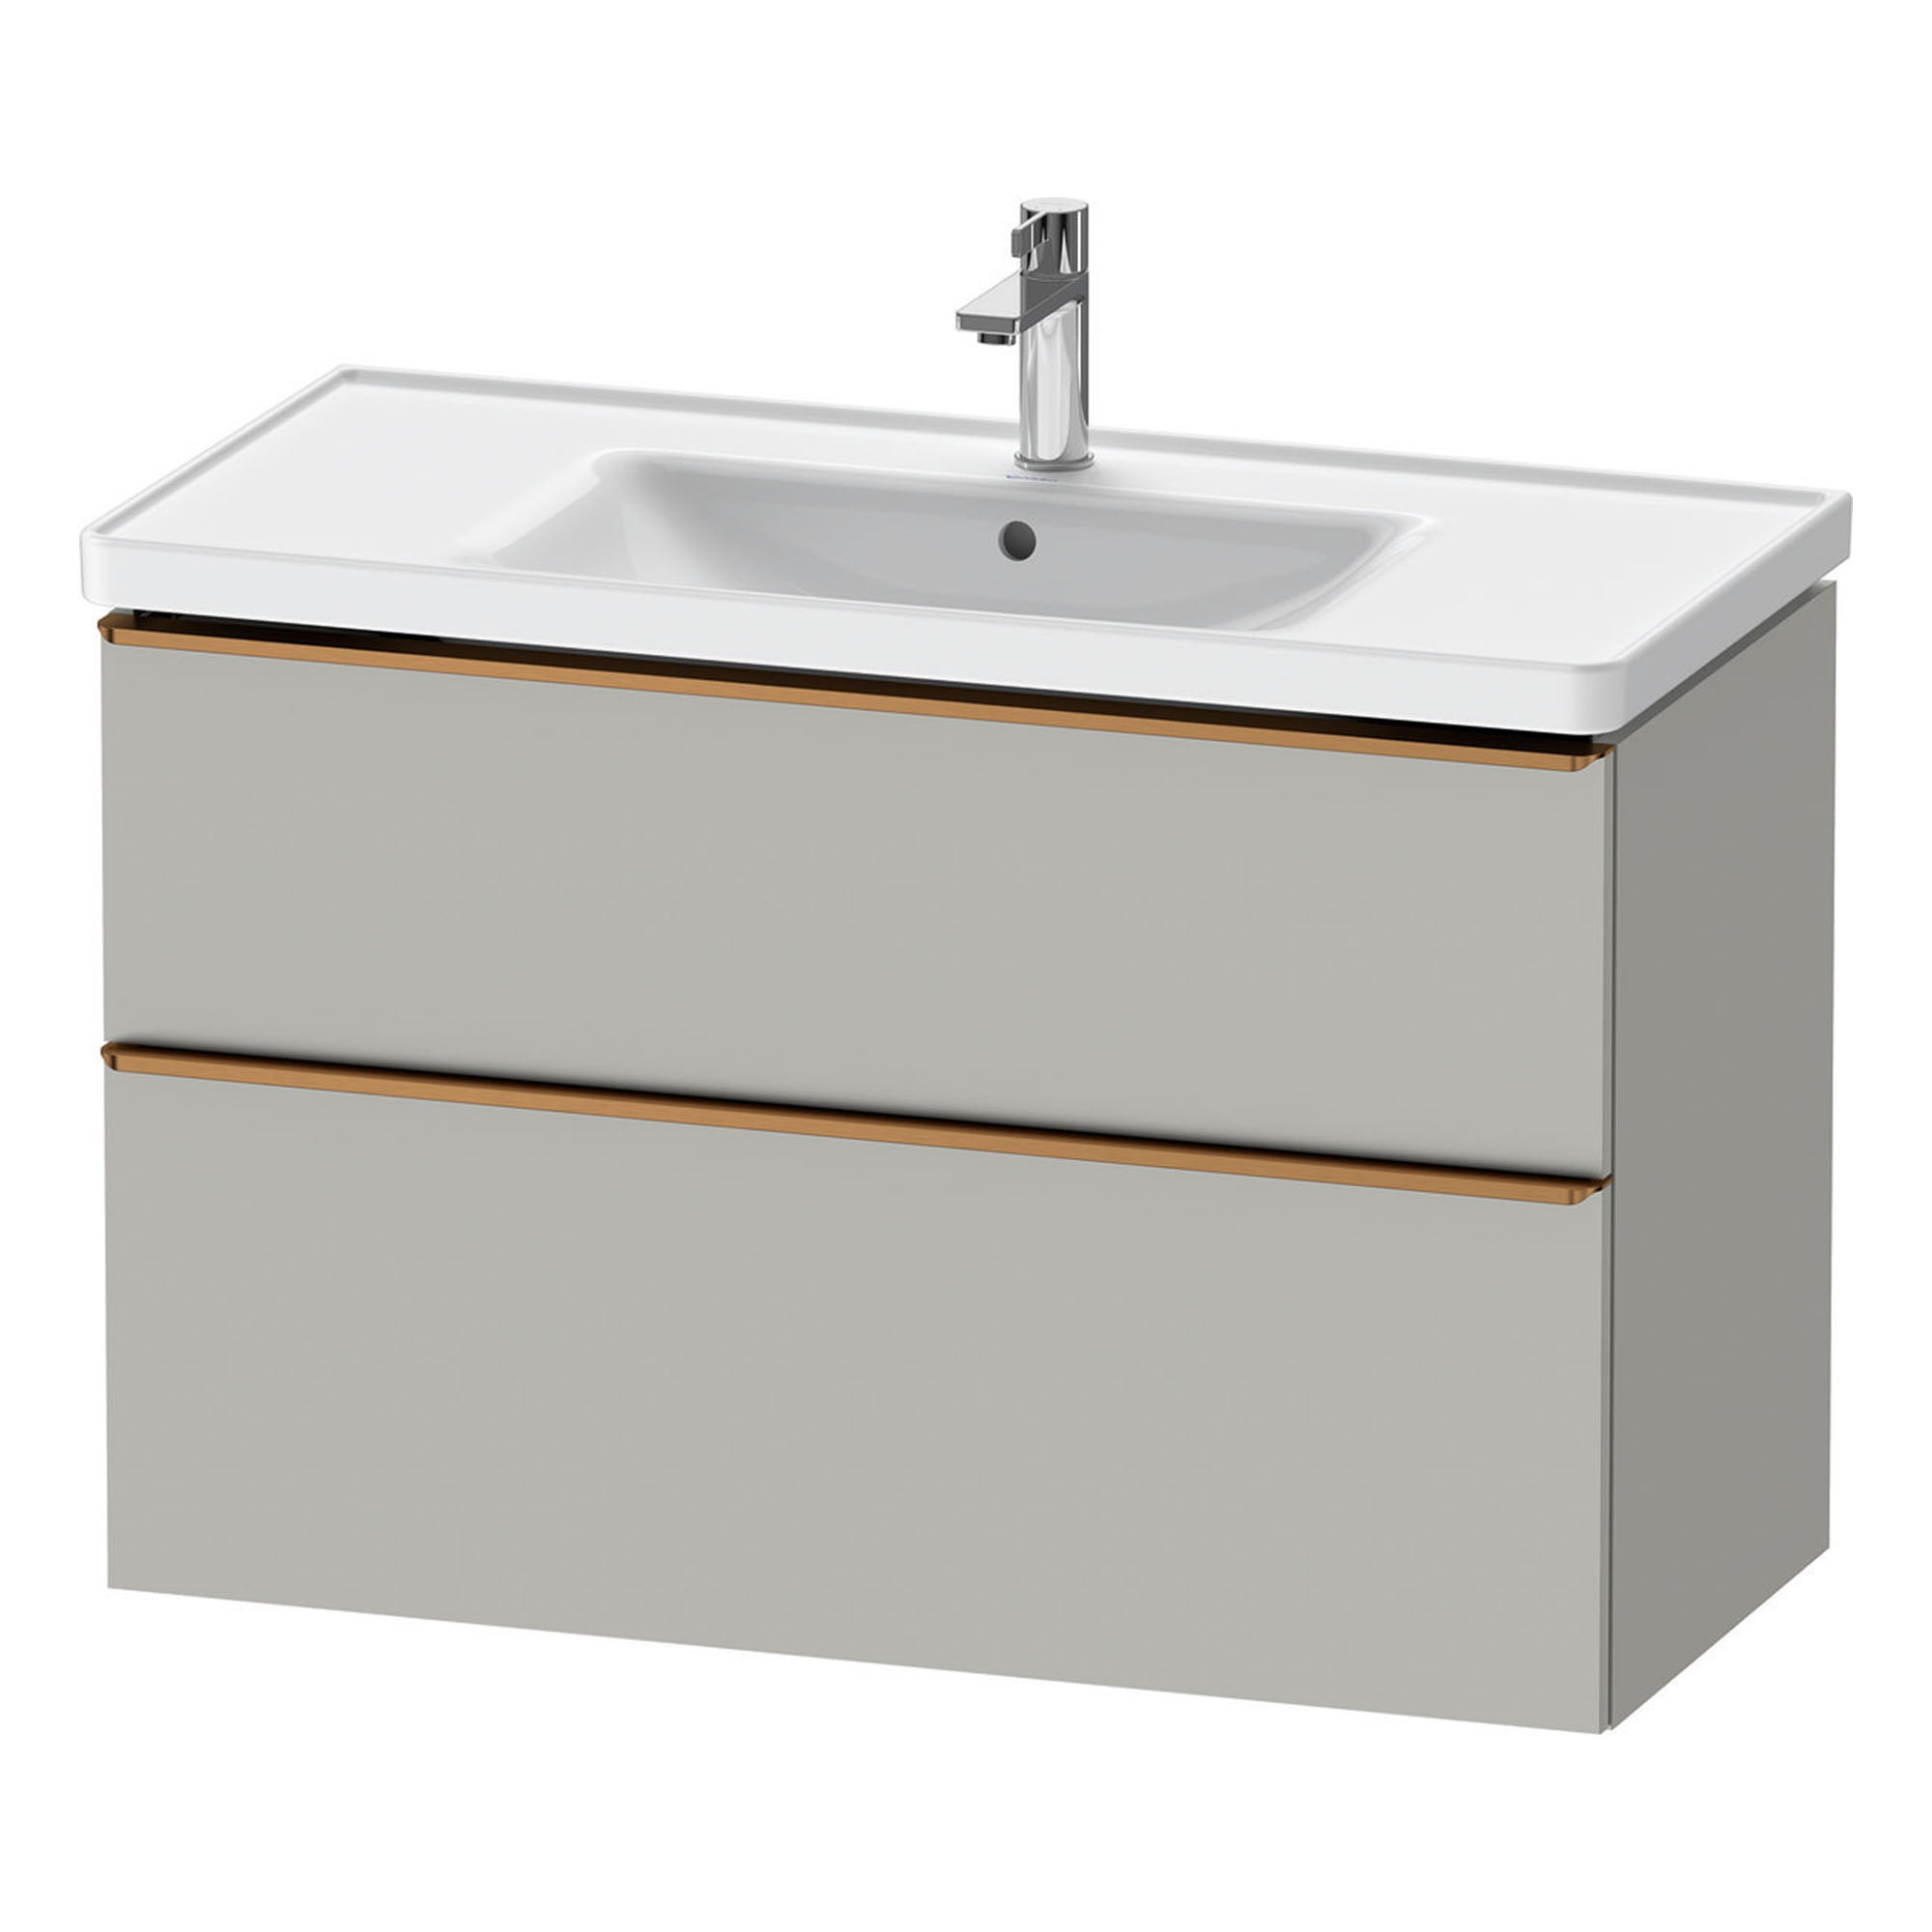 duravit d-neo 1000mm wall mounted vanity unit with d-neo basin concrete grey brushed bronze handles